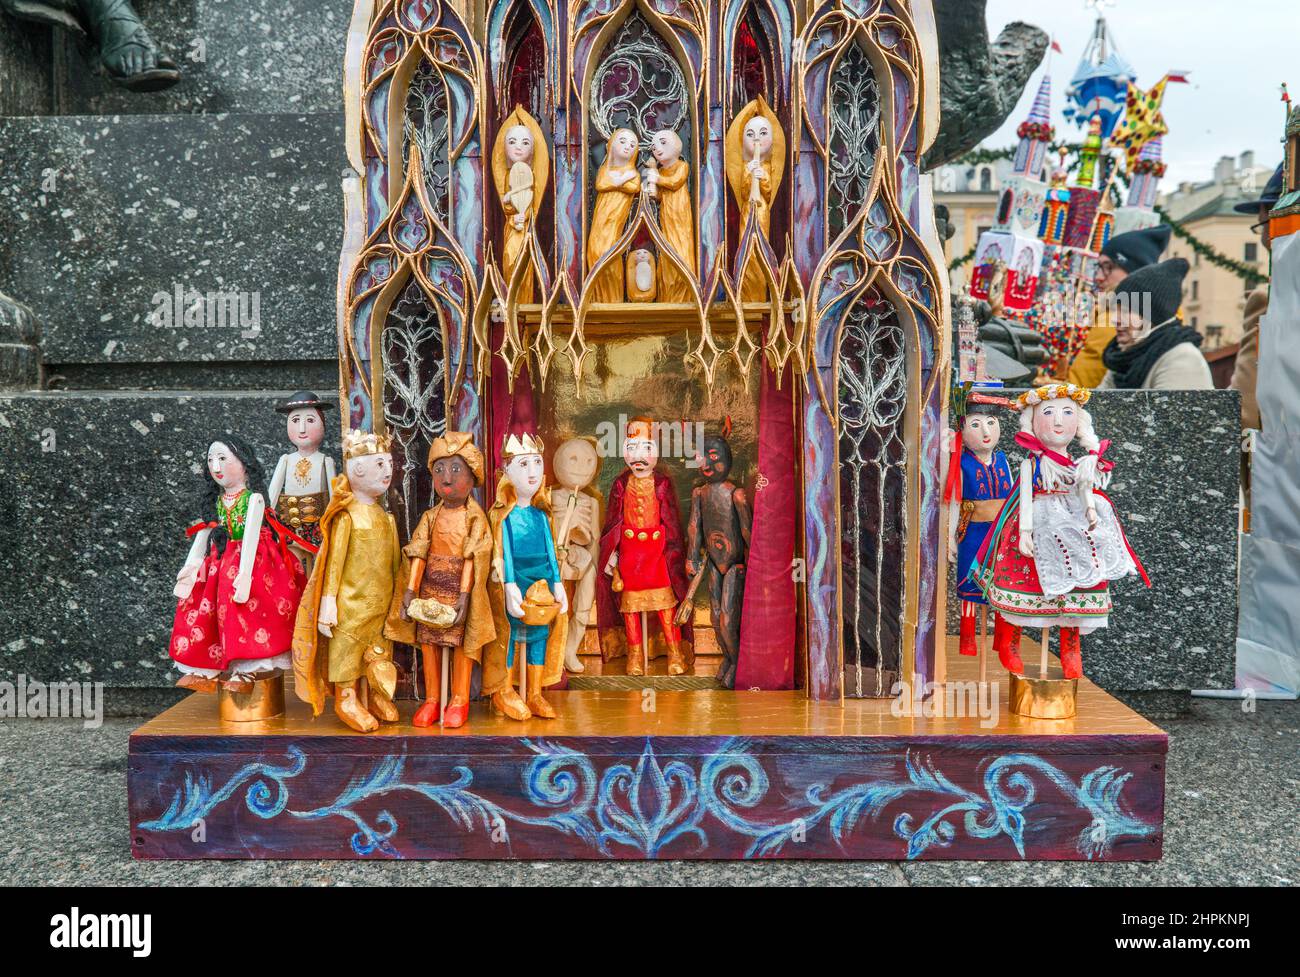 Figurines at Kraków Szopka nativity scene displayed during annual contest in December, event included in UNESCO Cultural Heritage list, at Adam Mickiewicz monument, Main Market Square, Kraków, Poland Stock Photo